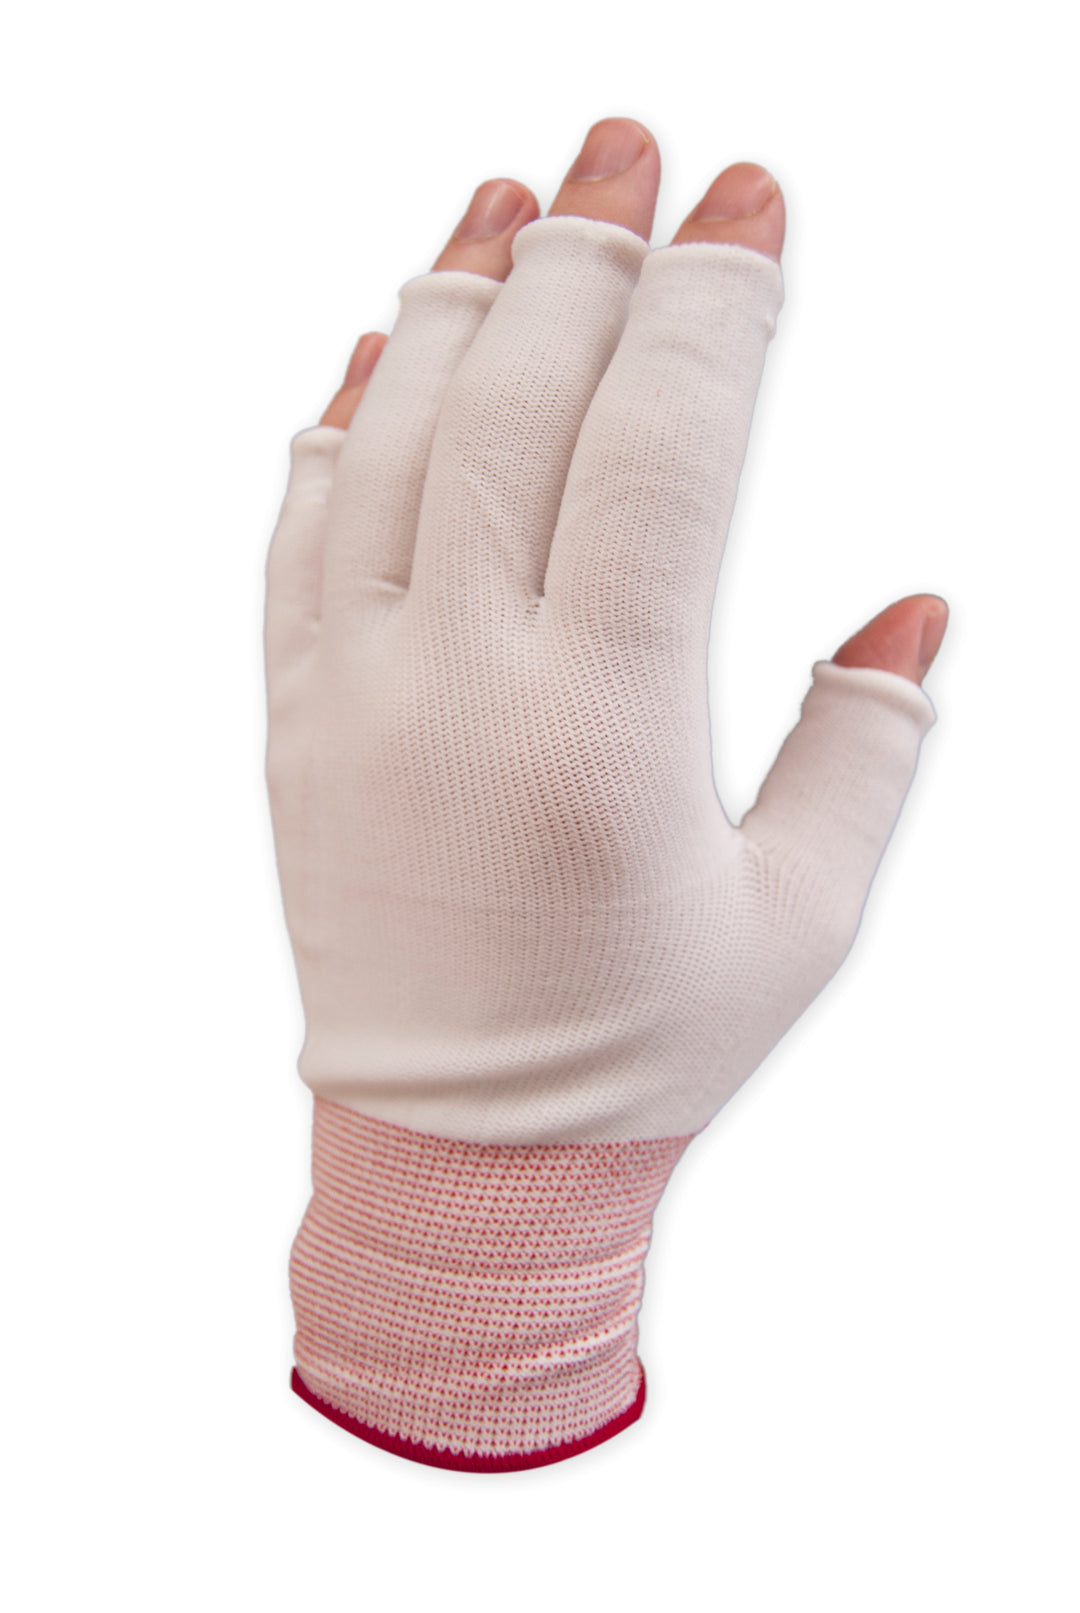 Purus GLHF Half Finger Pure Touch Glove Liners Small - XL